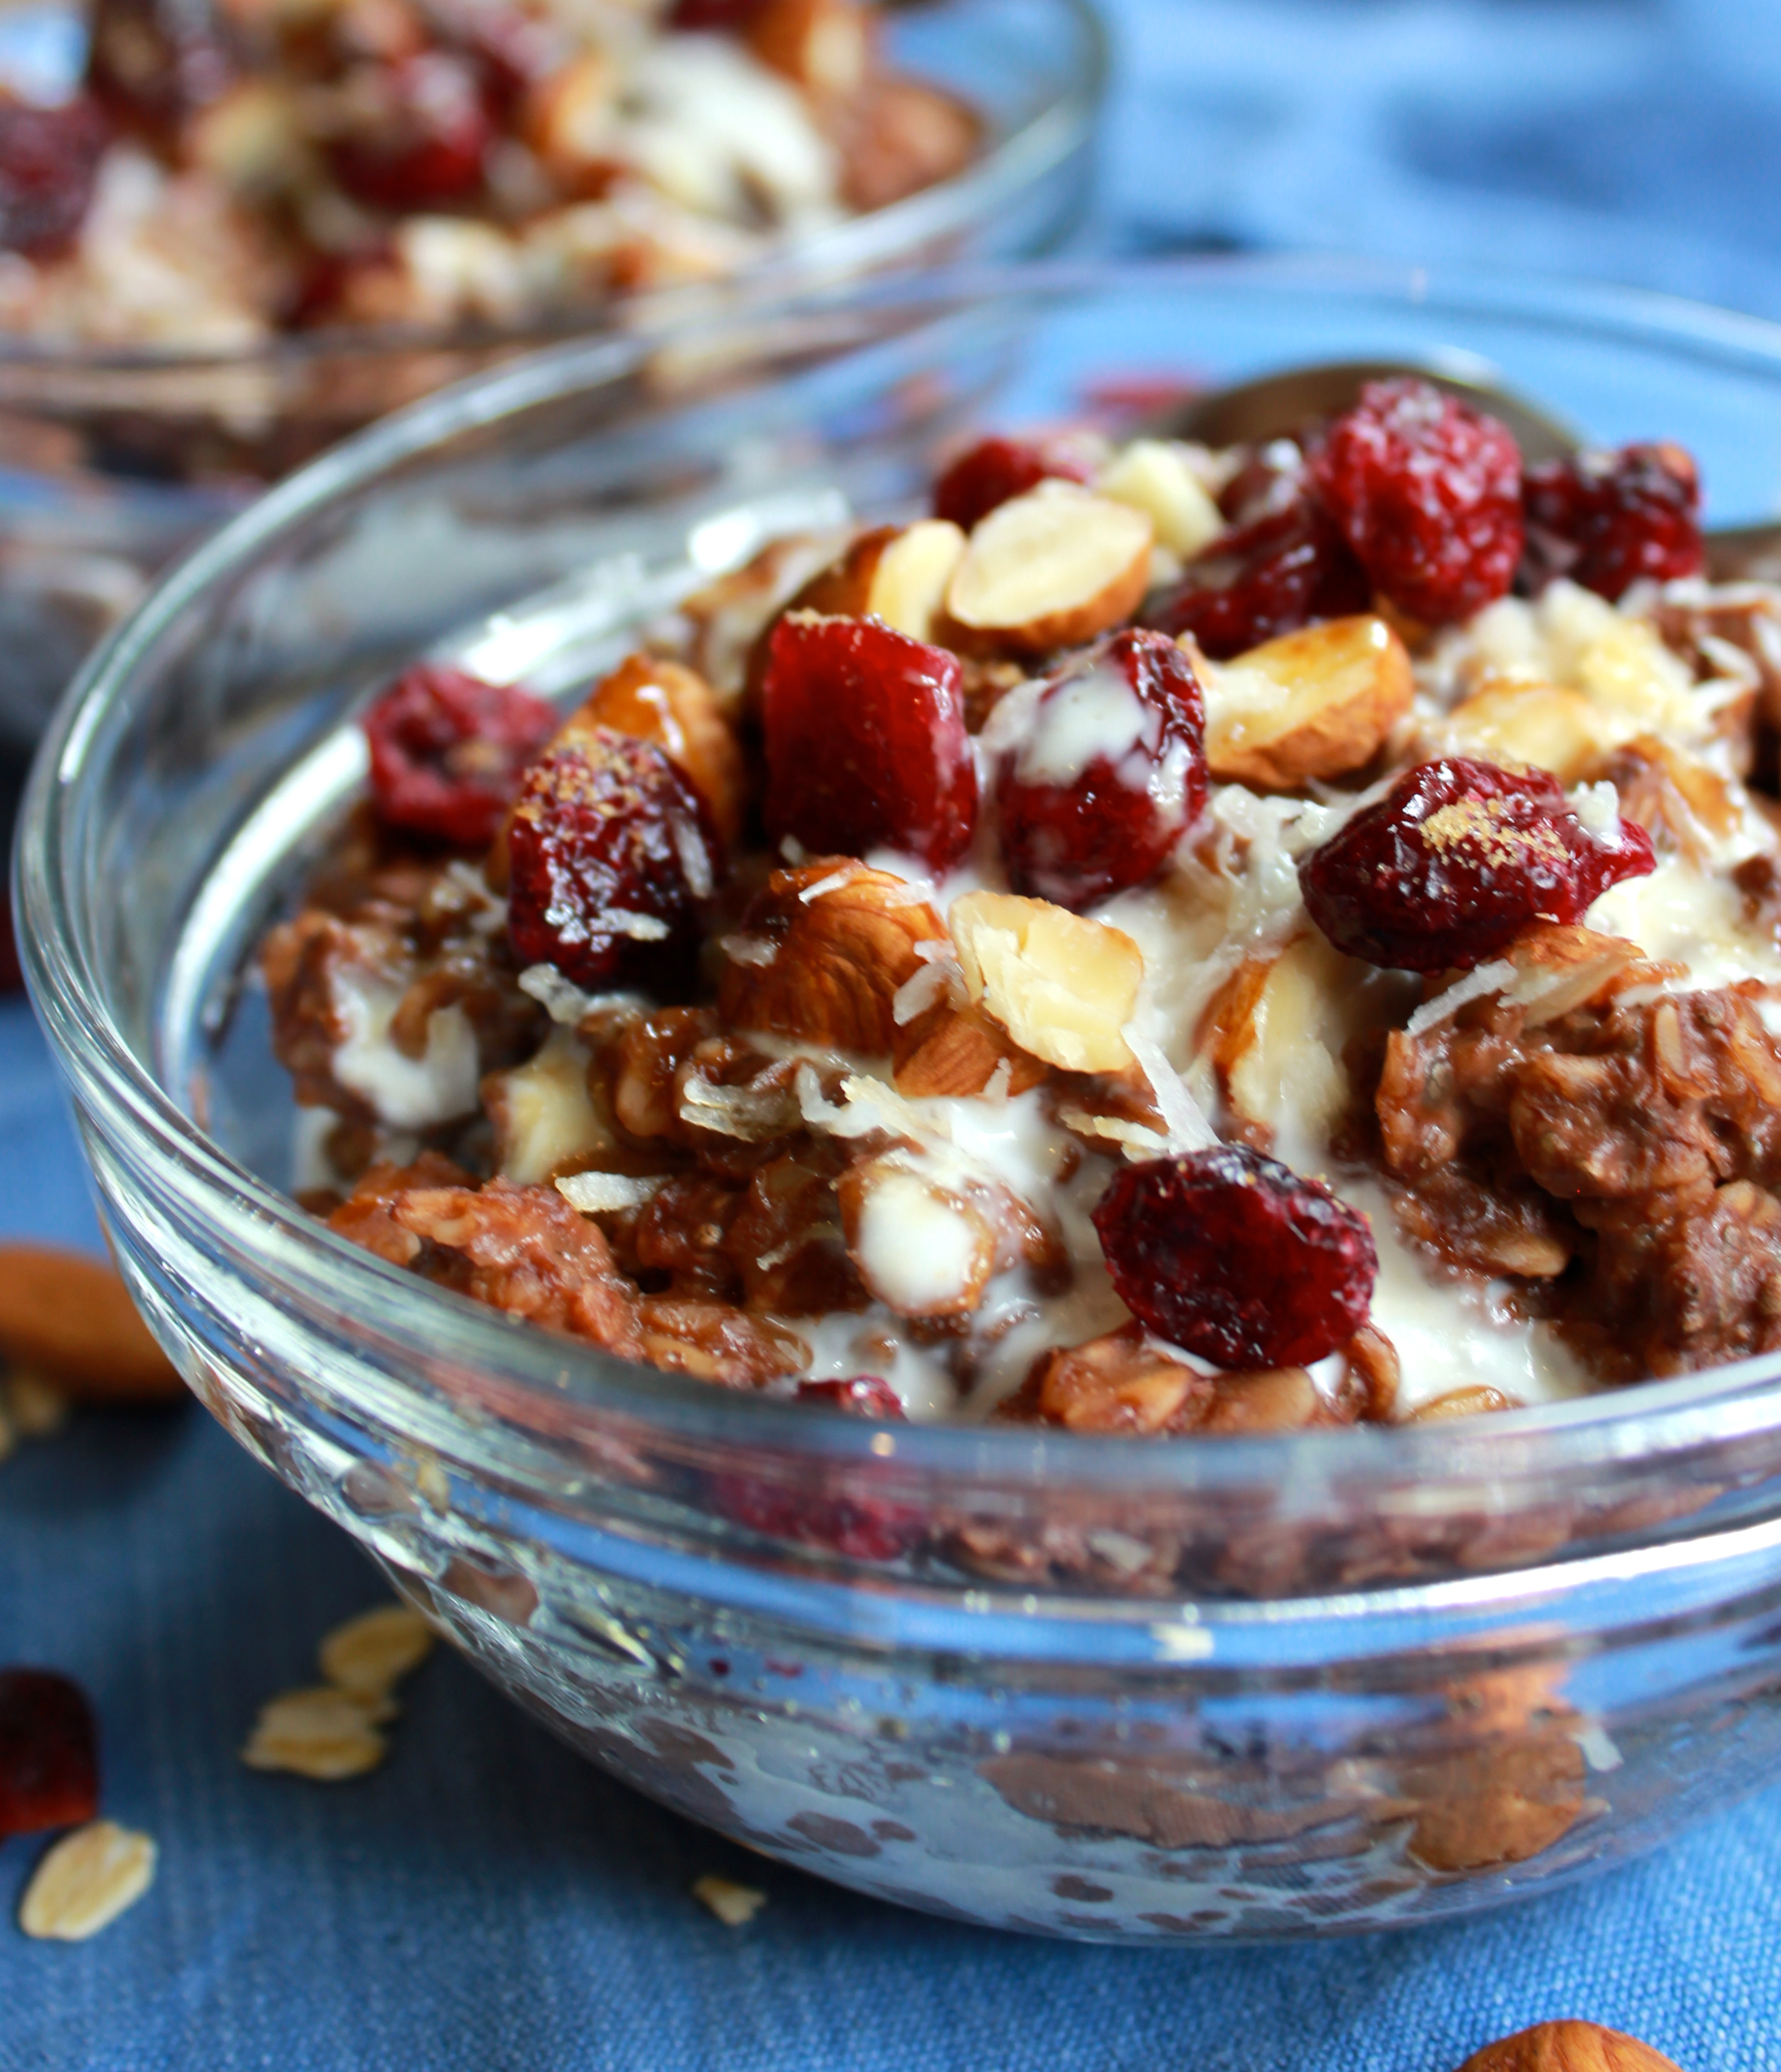 Add dried cranberries, chopped almonds, and unsweetened coconut for toppings!